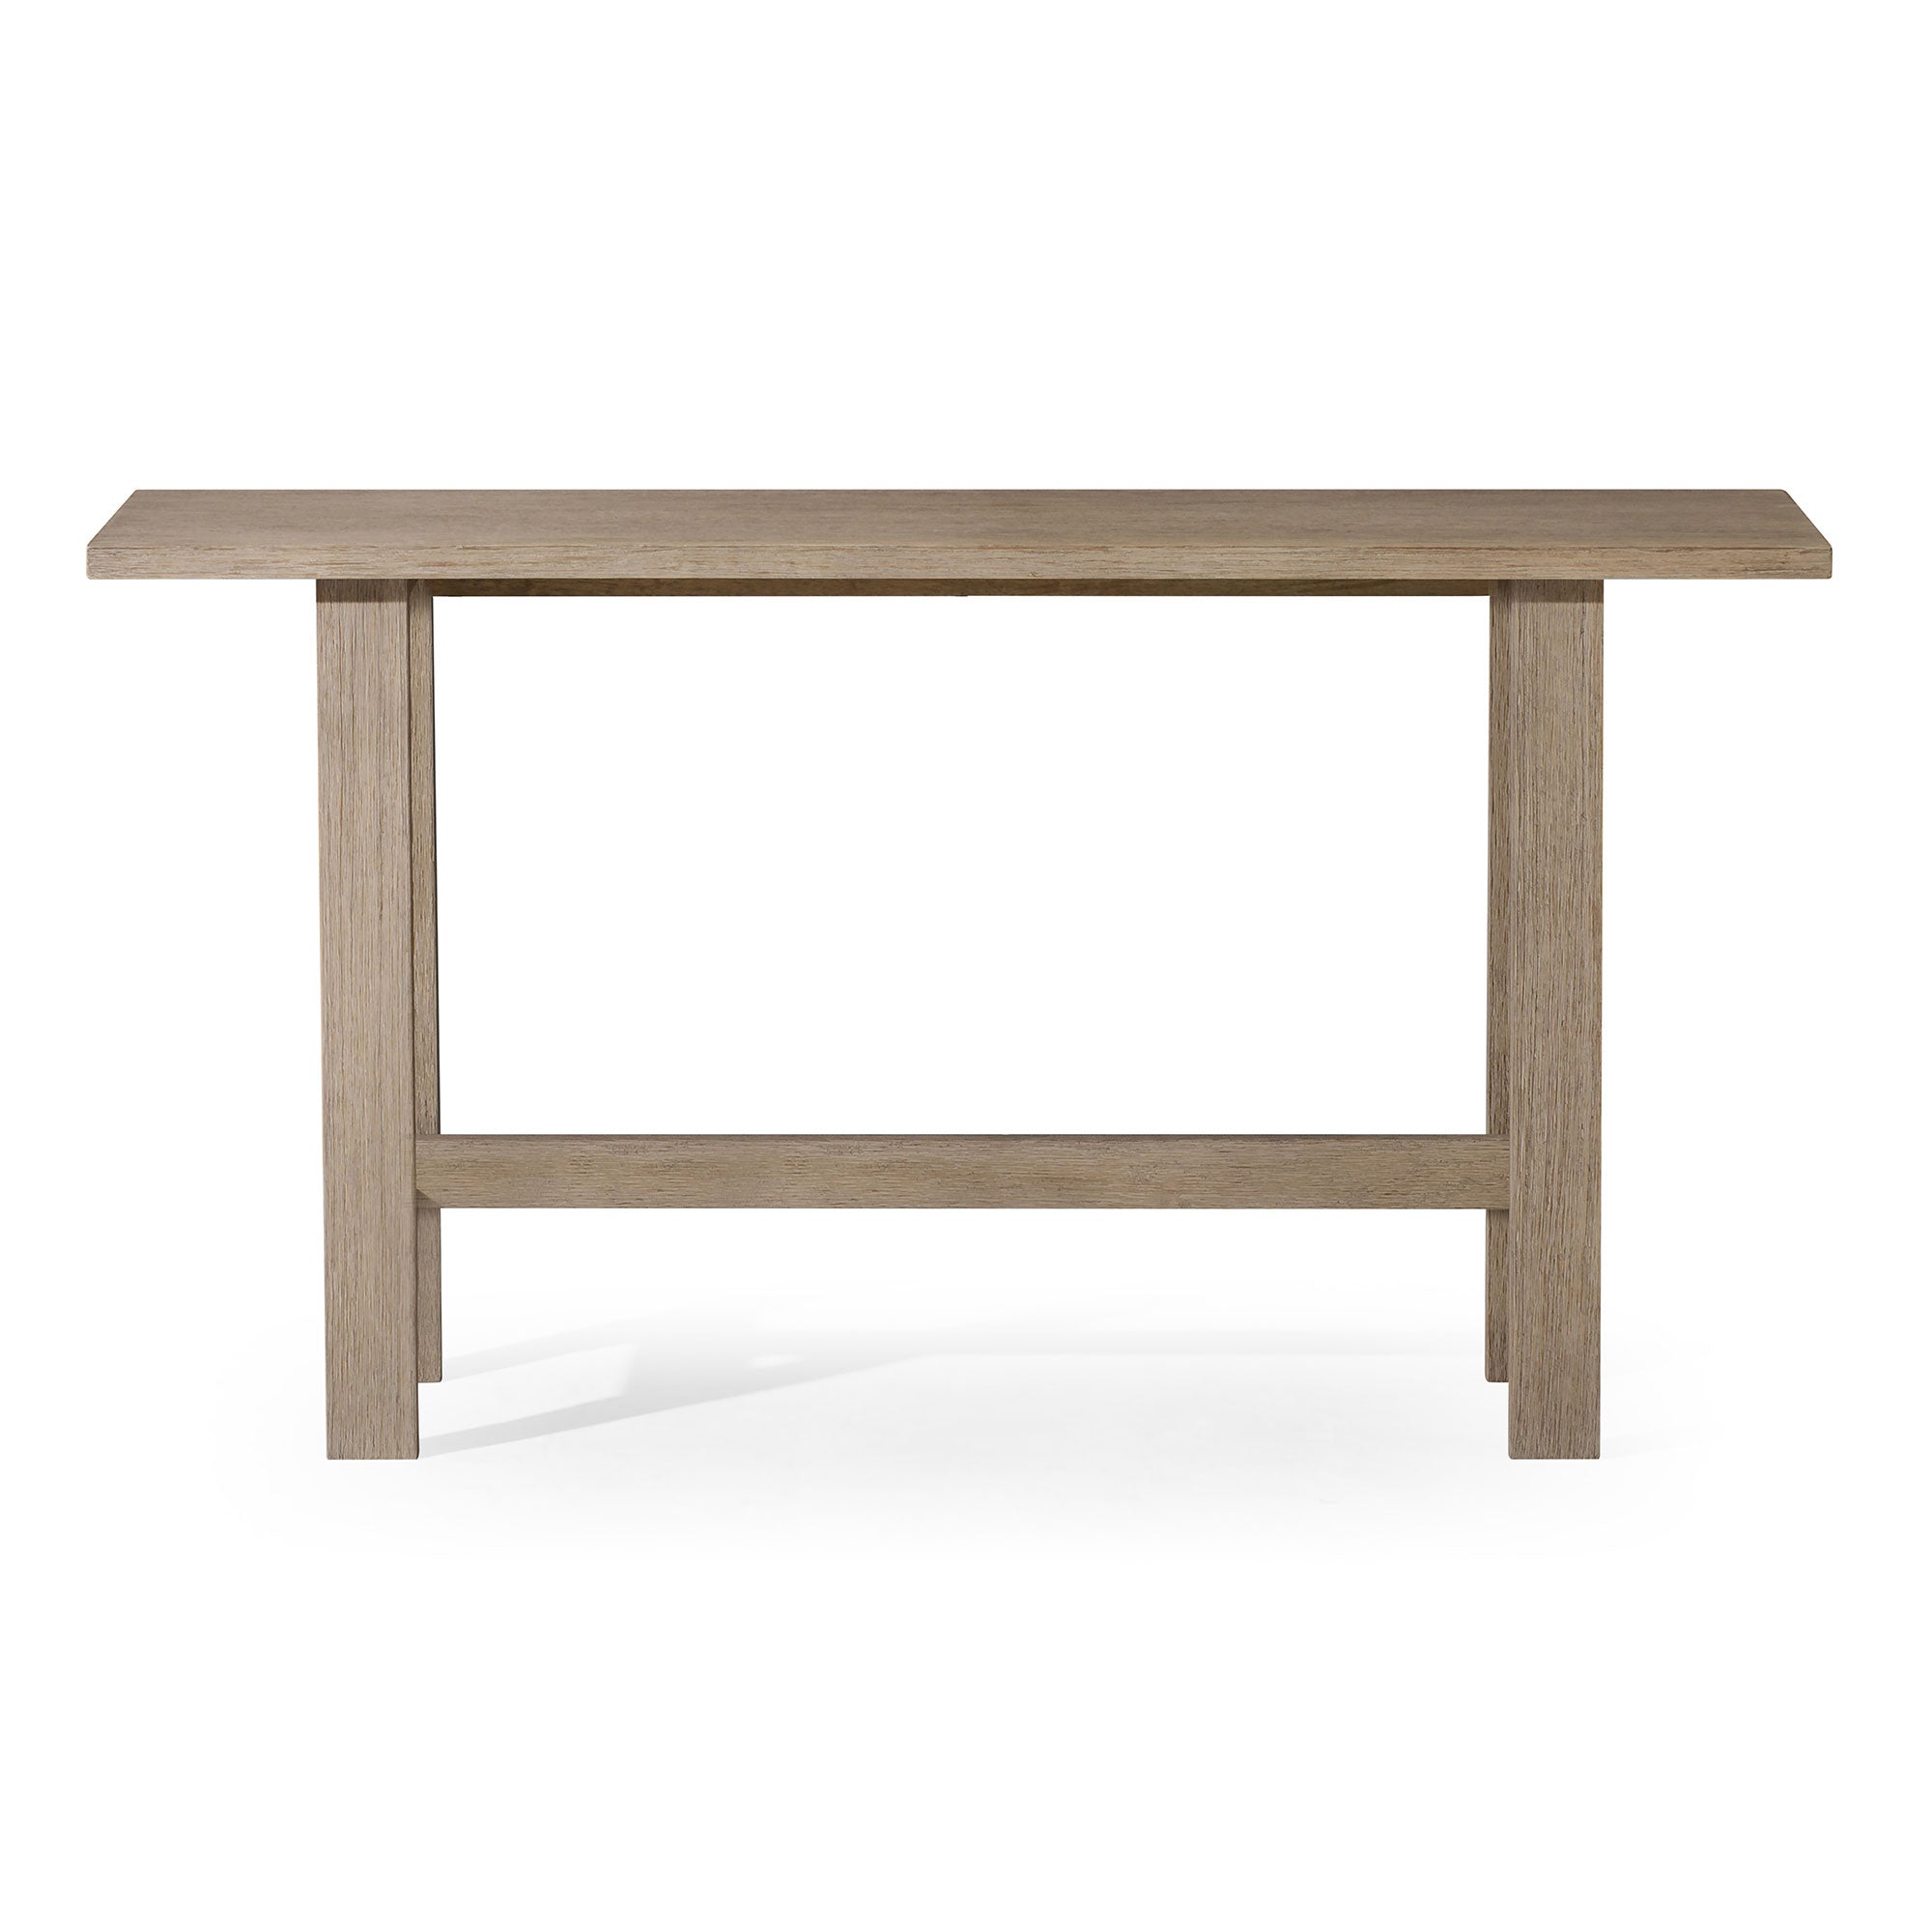 Hera Organic Wooden Console Table in Weathered Grey Finish in Accent Tables by Maven Lane